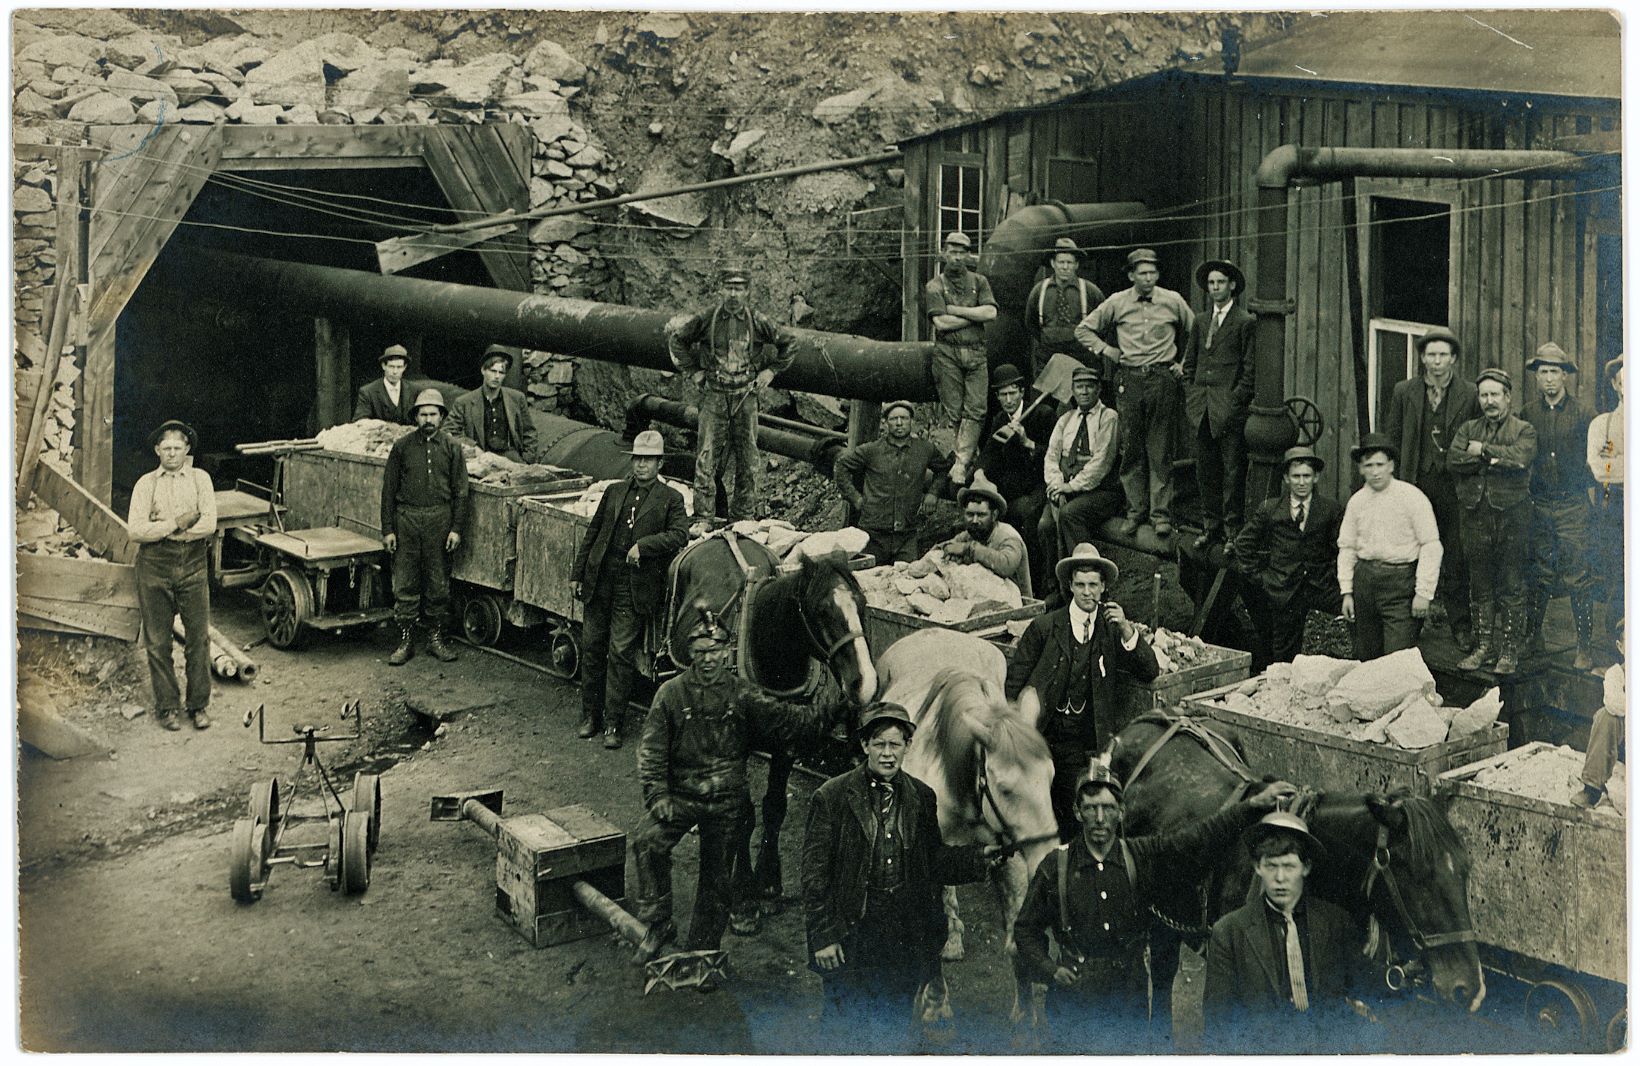 This Group-Photo of workers, management and equipment at the Portal of the Roosevelt Drainage Tunnel during its construction has been used in an article in the July 1914 edition of the Mining Science journal/magazine, so it predates that date with an unknown time. No names given in neither of my sources for this image, but there are many men here.
   Image shows 8-ore-cars filled with rock from the tunnel work, also three horses are held in front of the cars, uncertain if they where the motive power used to haul the cars out of the tunnel. There are also some other foot powered rail cycle types shown, a shed makes up some of the background, a compressor building of some sort as there is a large pipe coming from it into the tunnel opening.